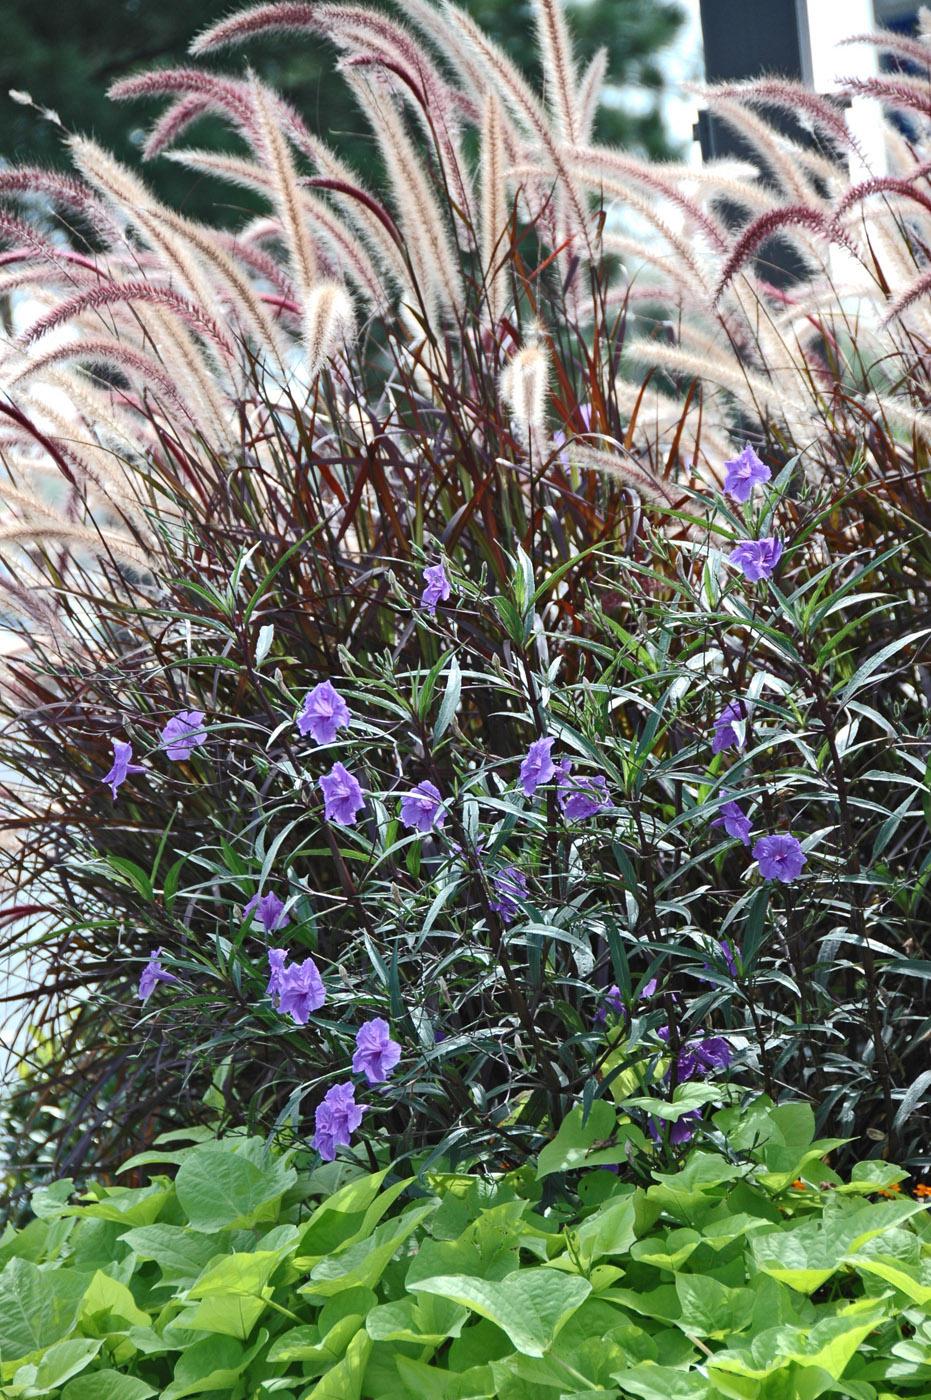 The sun gleams through the foxtail-like blooms of the purple fountain grass, whose leaf color works in monochromatic harmony with the Mexican petunia. The planting also includes Marguerite sweet potato vines with bright chartreuse foliage, making a great complementary marriage with the petunias' iridescent blue flowers.